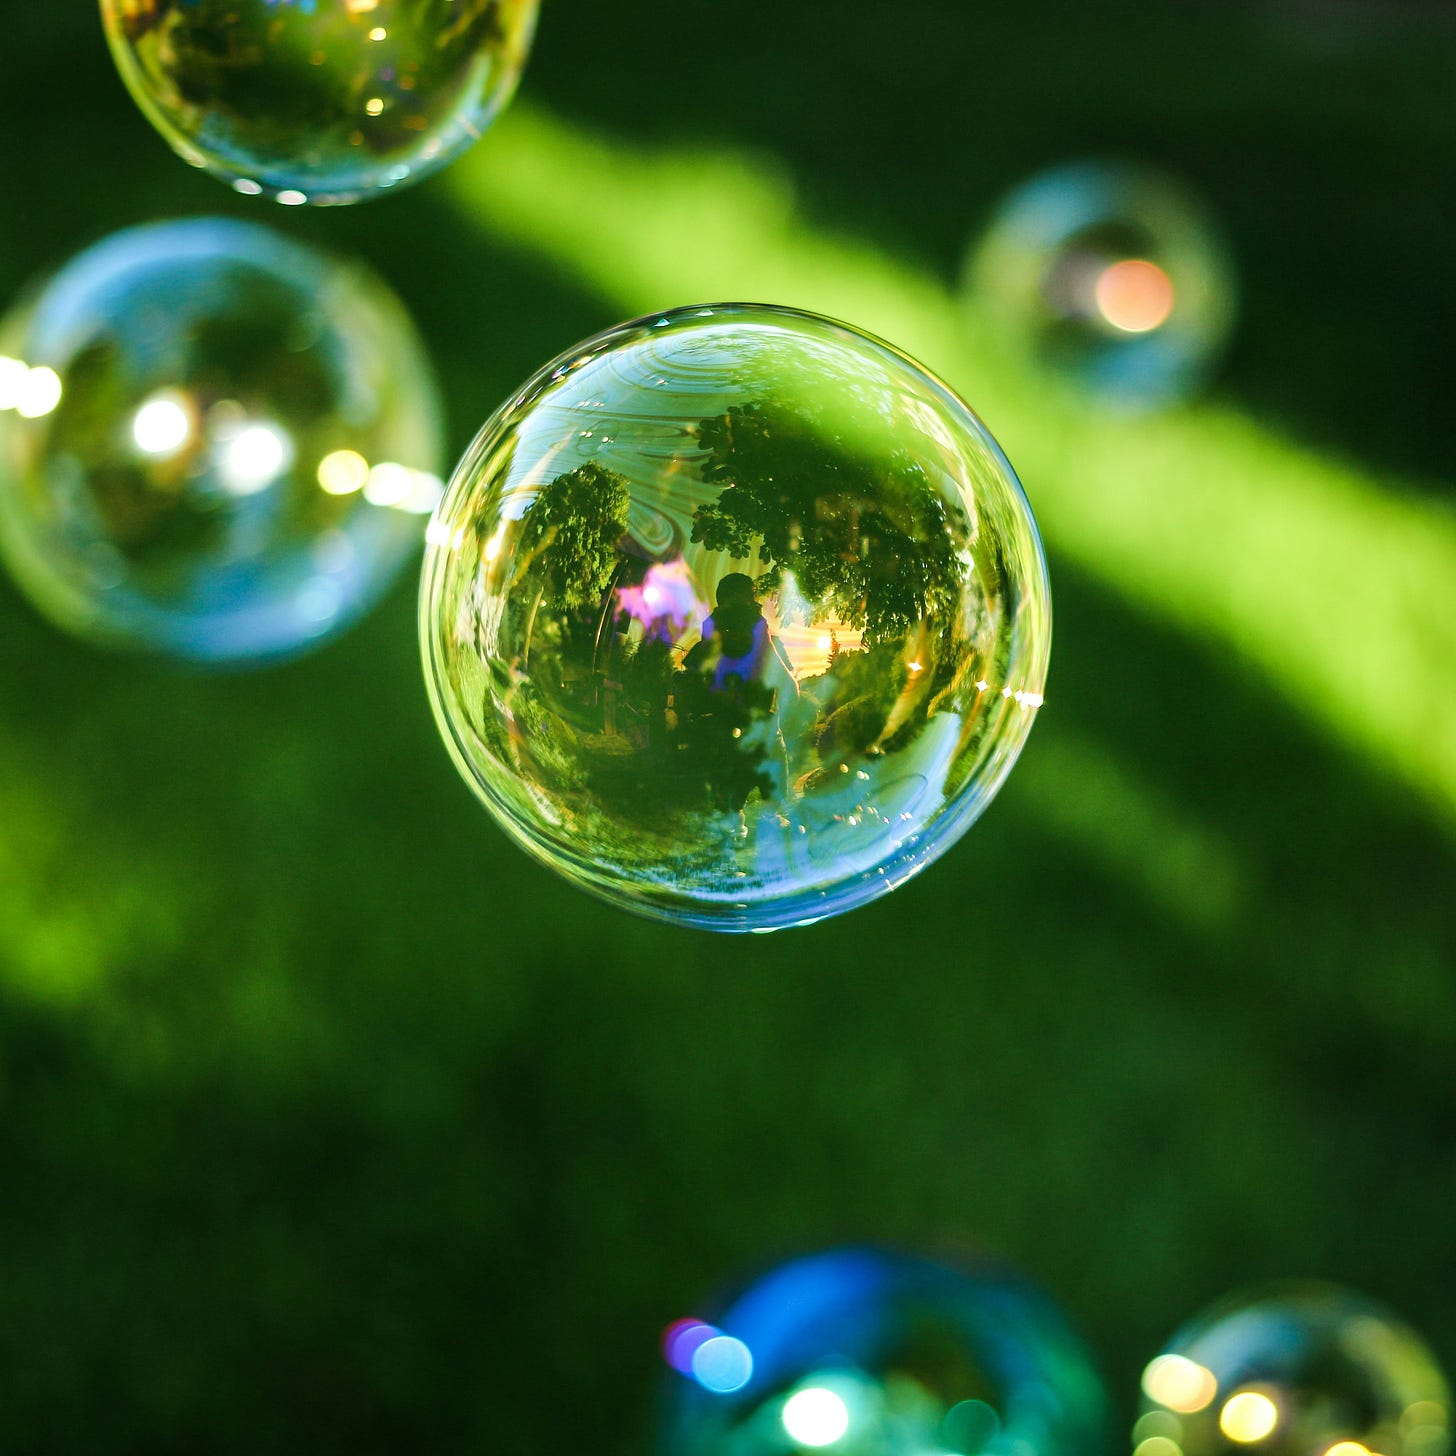 bubbles floating over shady grass